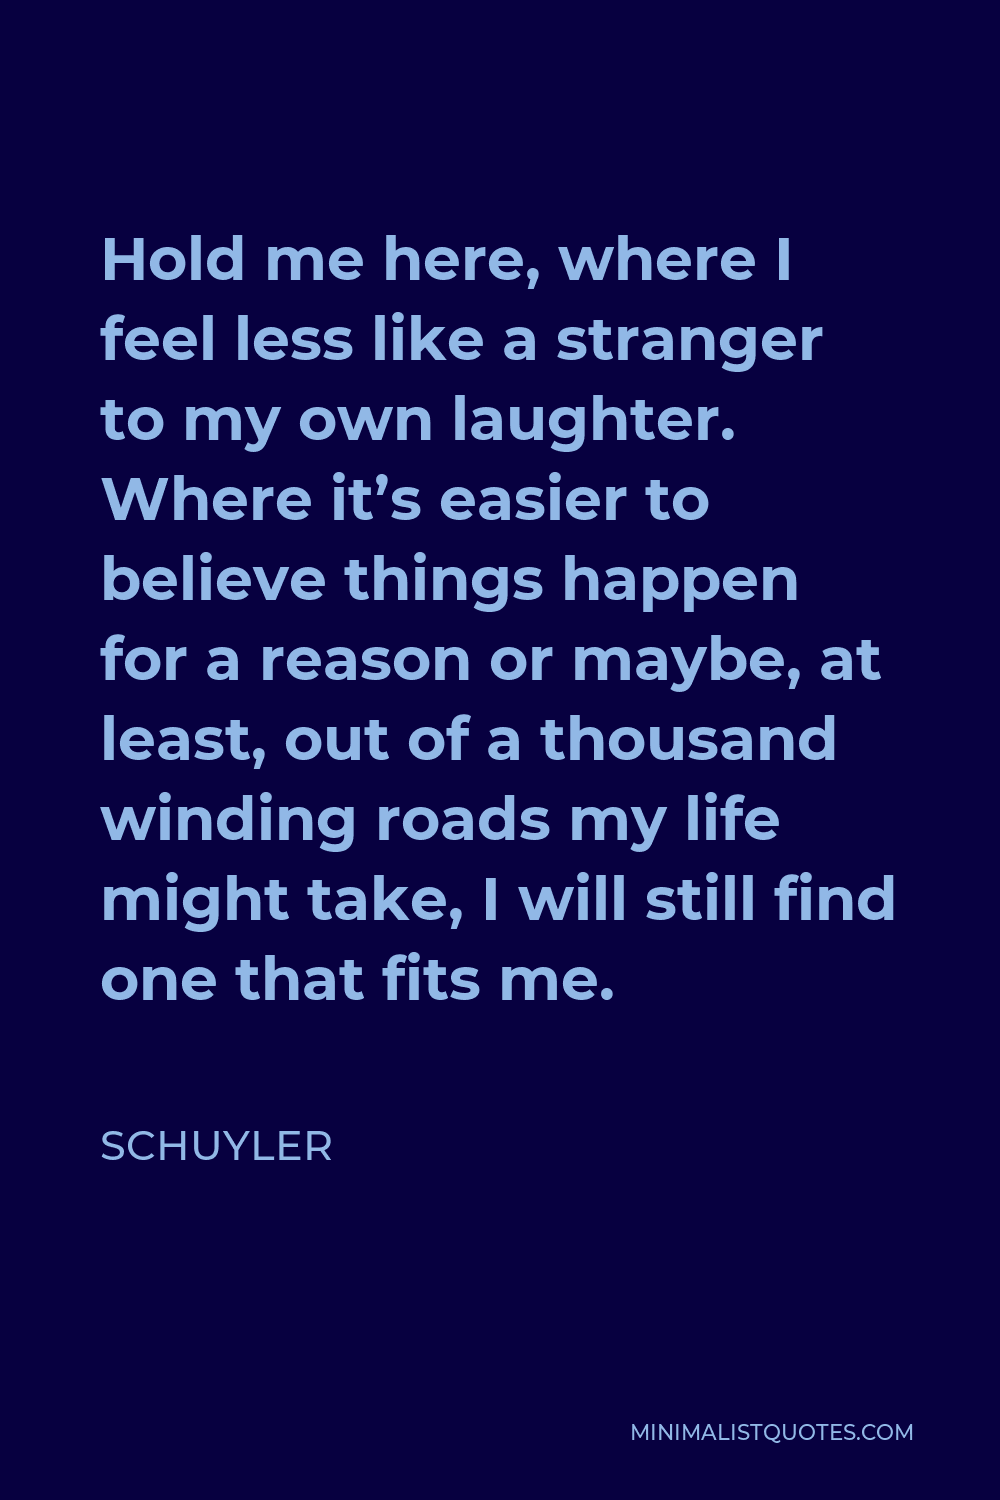 Schuyler Quote - Hold me here, where I feel less like a stranger to my own laughter. Where it’s easier to believe things happen for a reason or maybe, at least, out of a thousand winding roads my life might take, I will still find one that fits me.